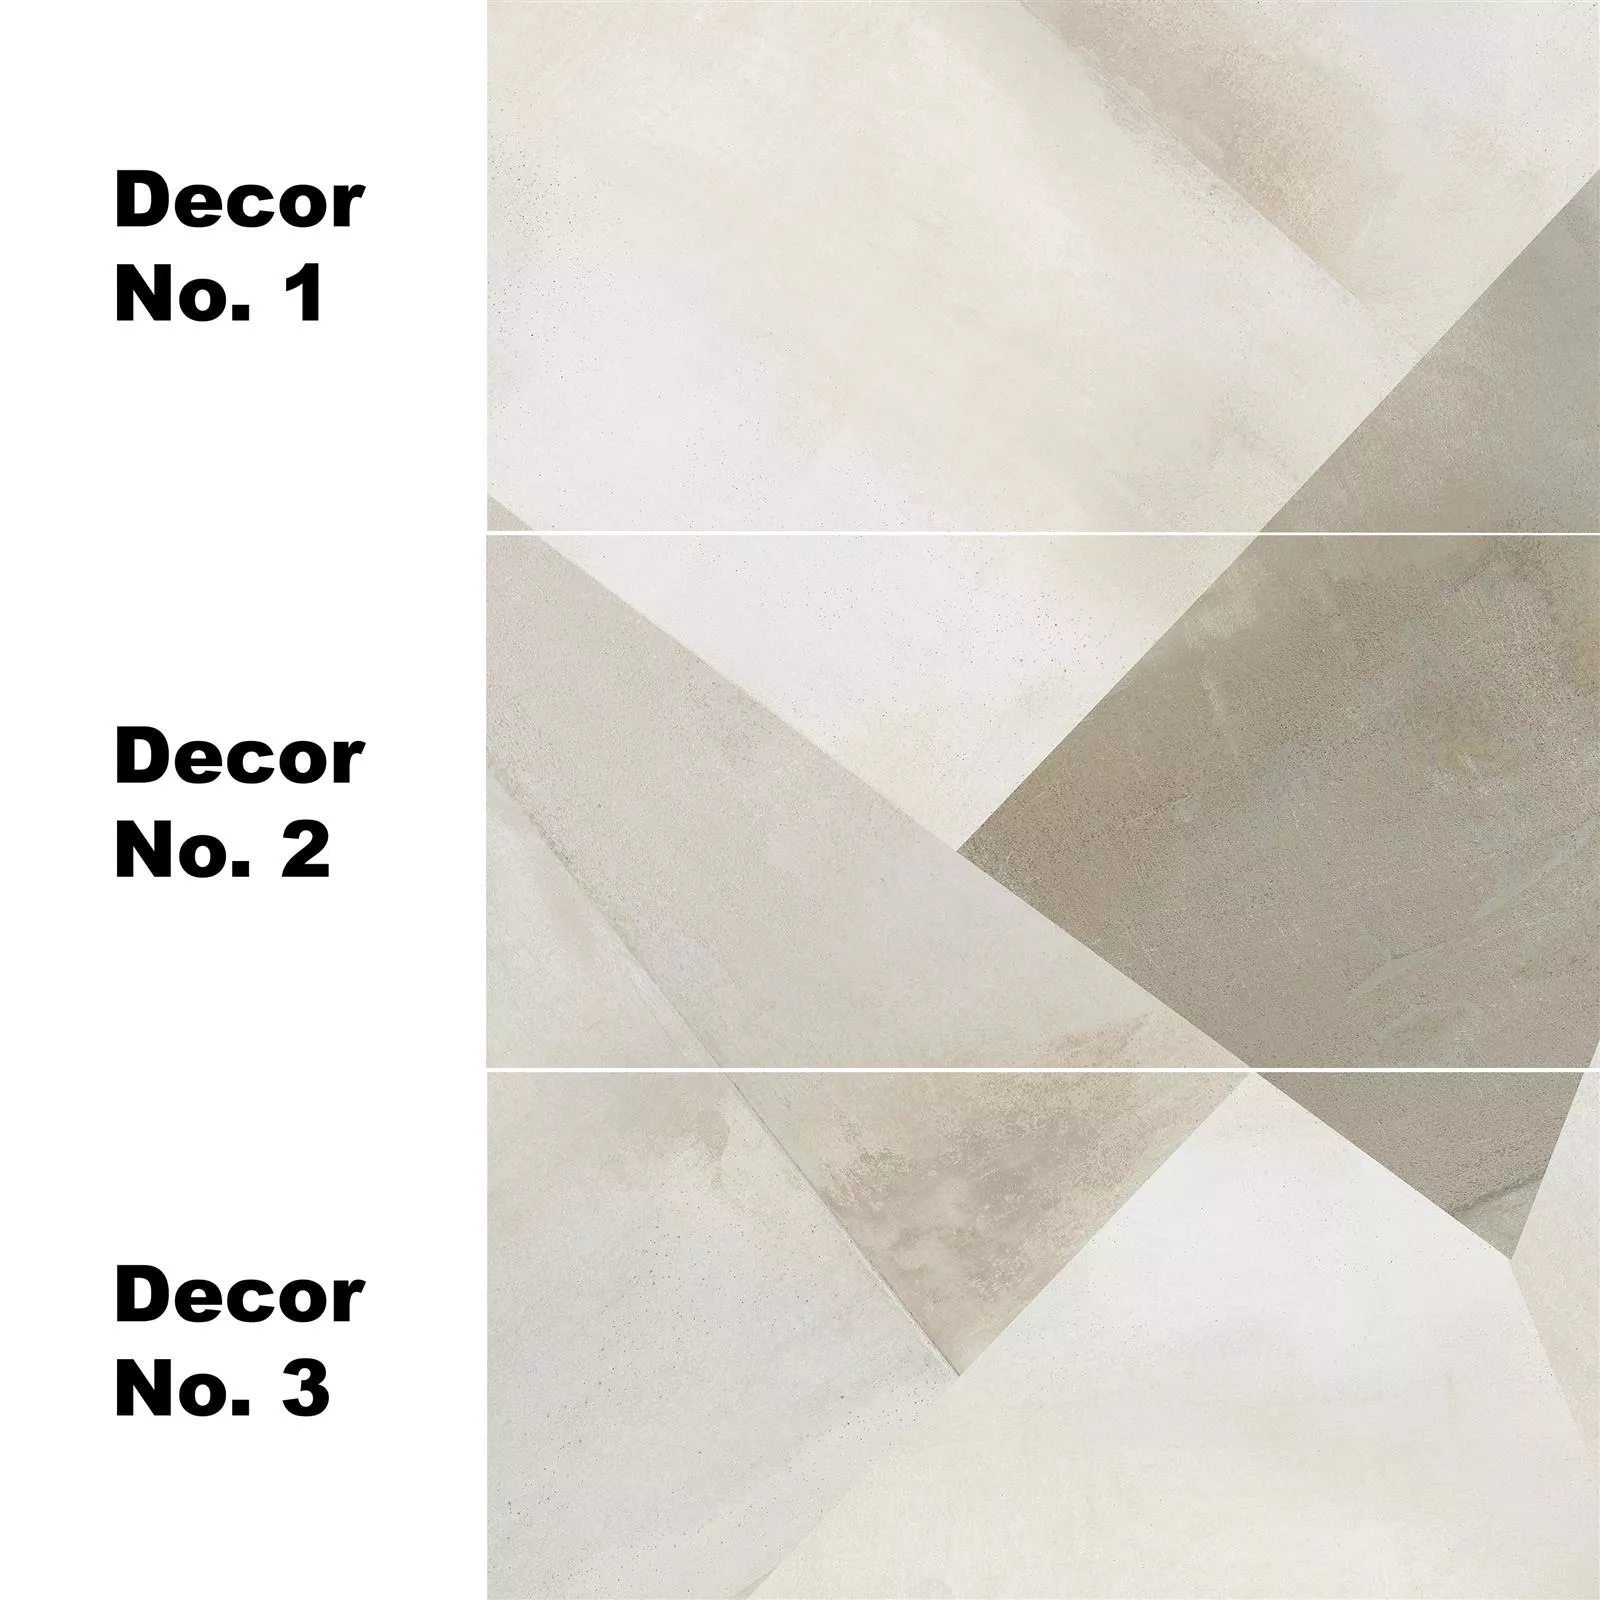 Wall Tiles Queens Rectified Sand Decor 2 30x60cm